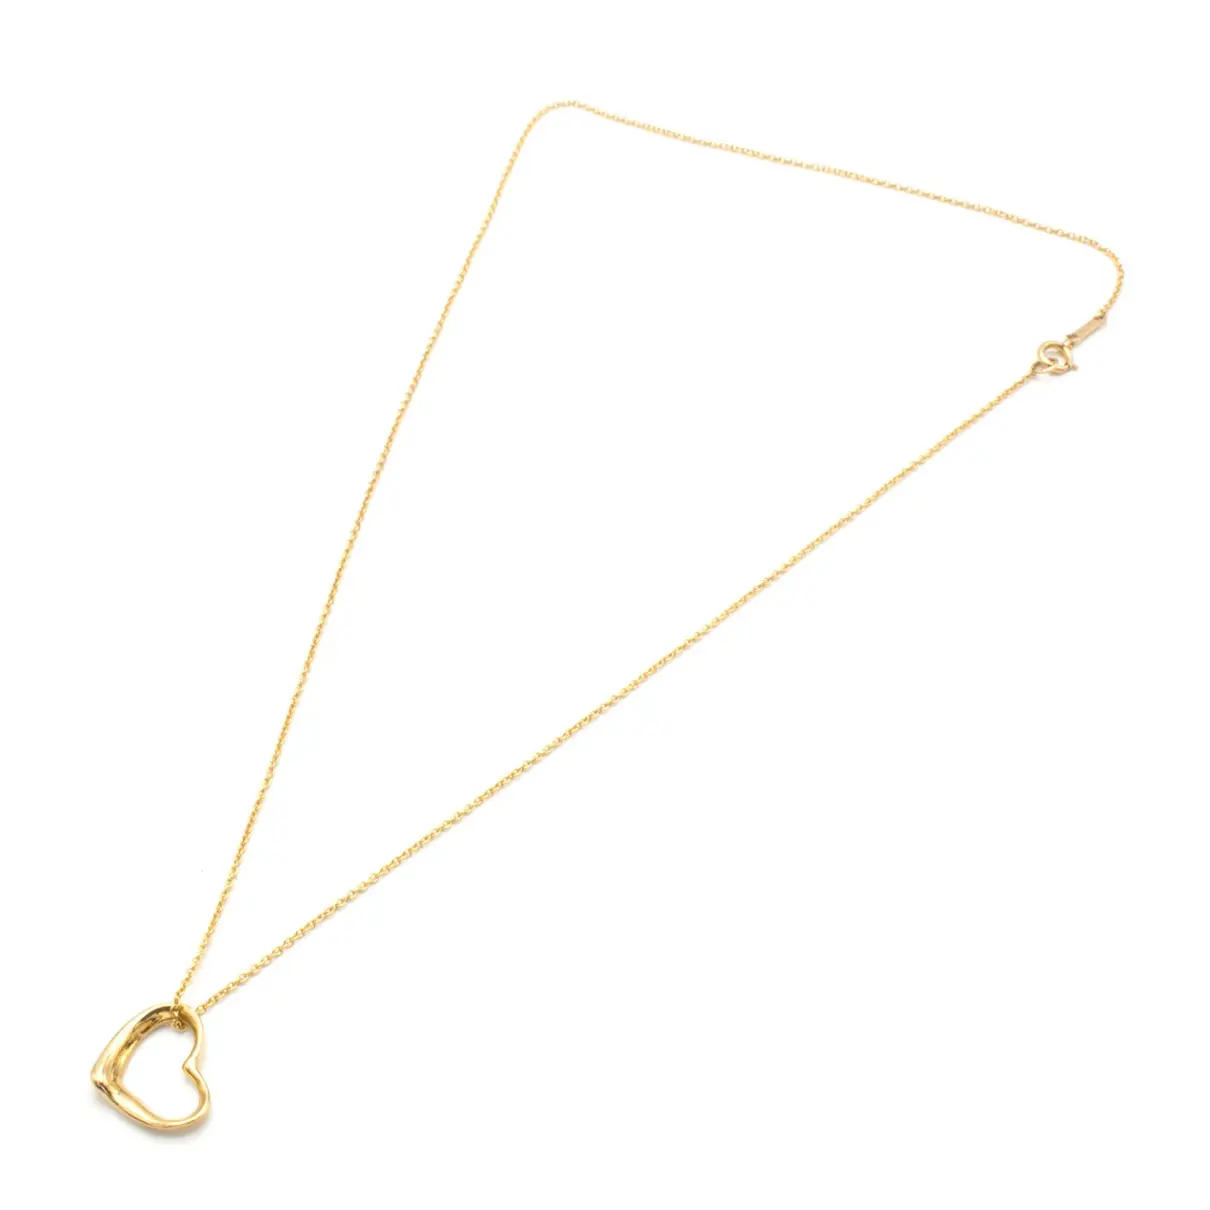 Buy Tiffany & Co Elsa Peretti yellow gold necklace online